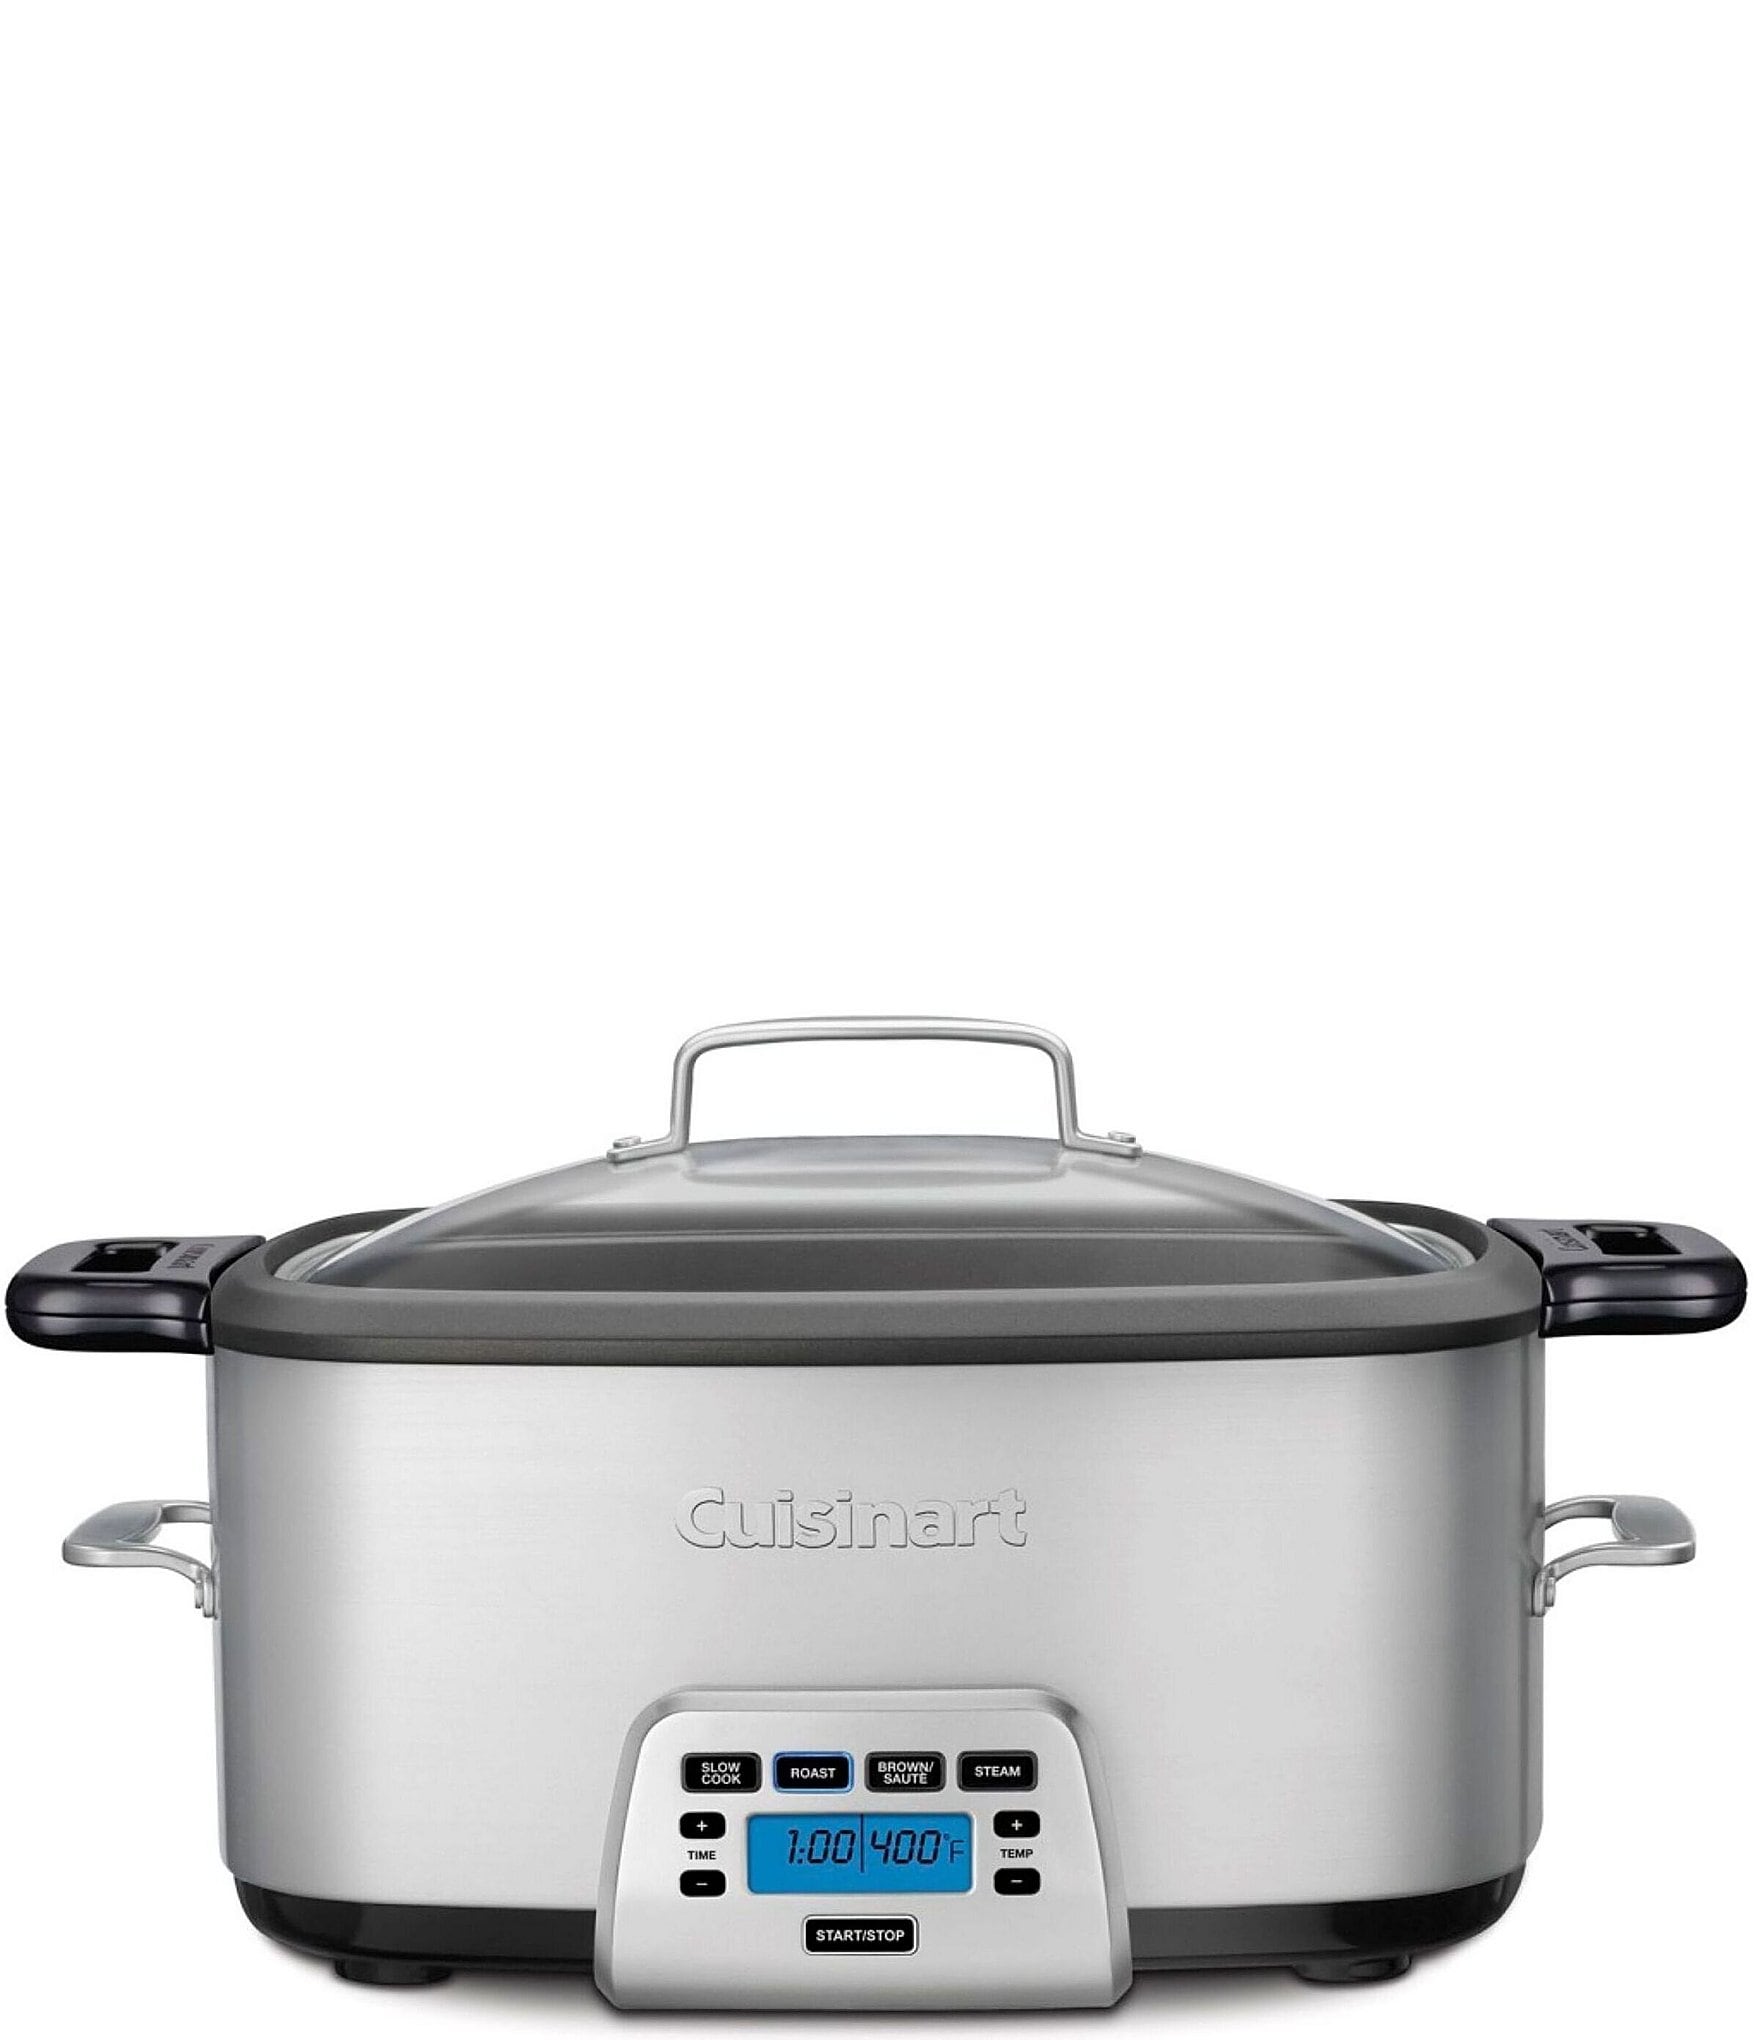 New Cuisinart 7-Quart 4-in-1 Cook Central Multicooker - household